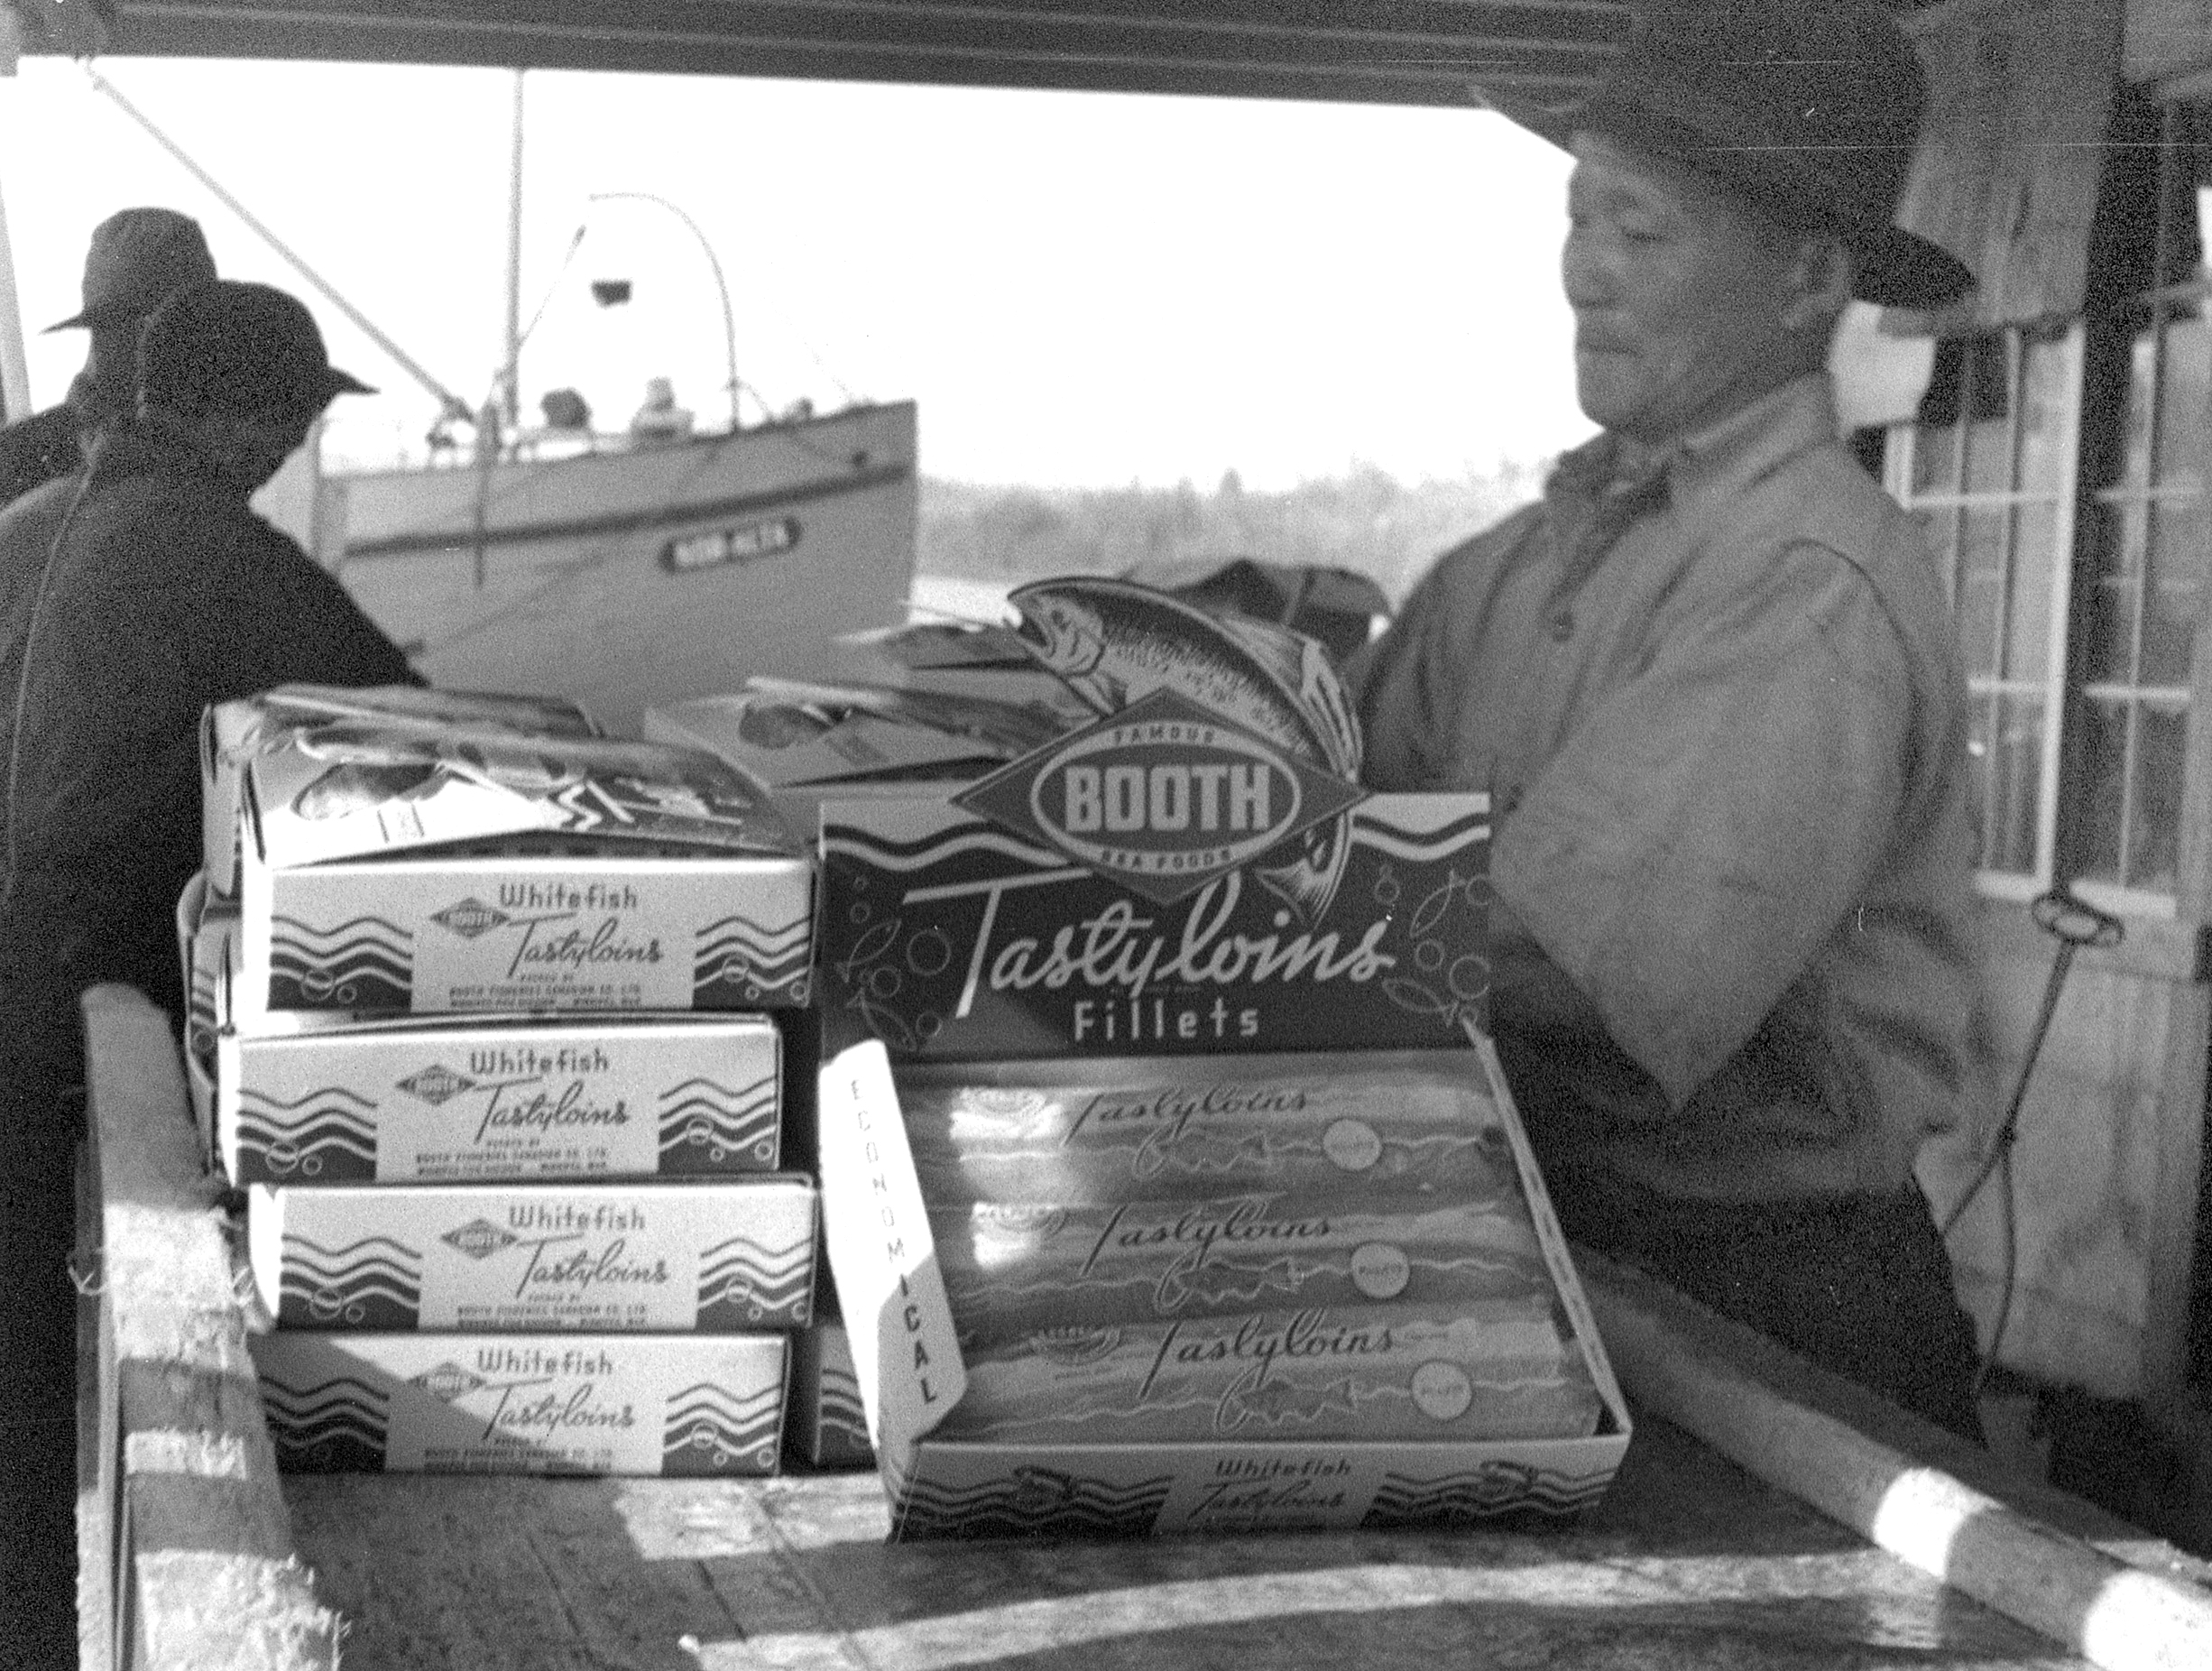 A Japanese worker packs frozen whitefish filets at Gros Cap in 1946.